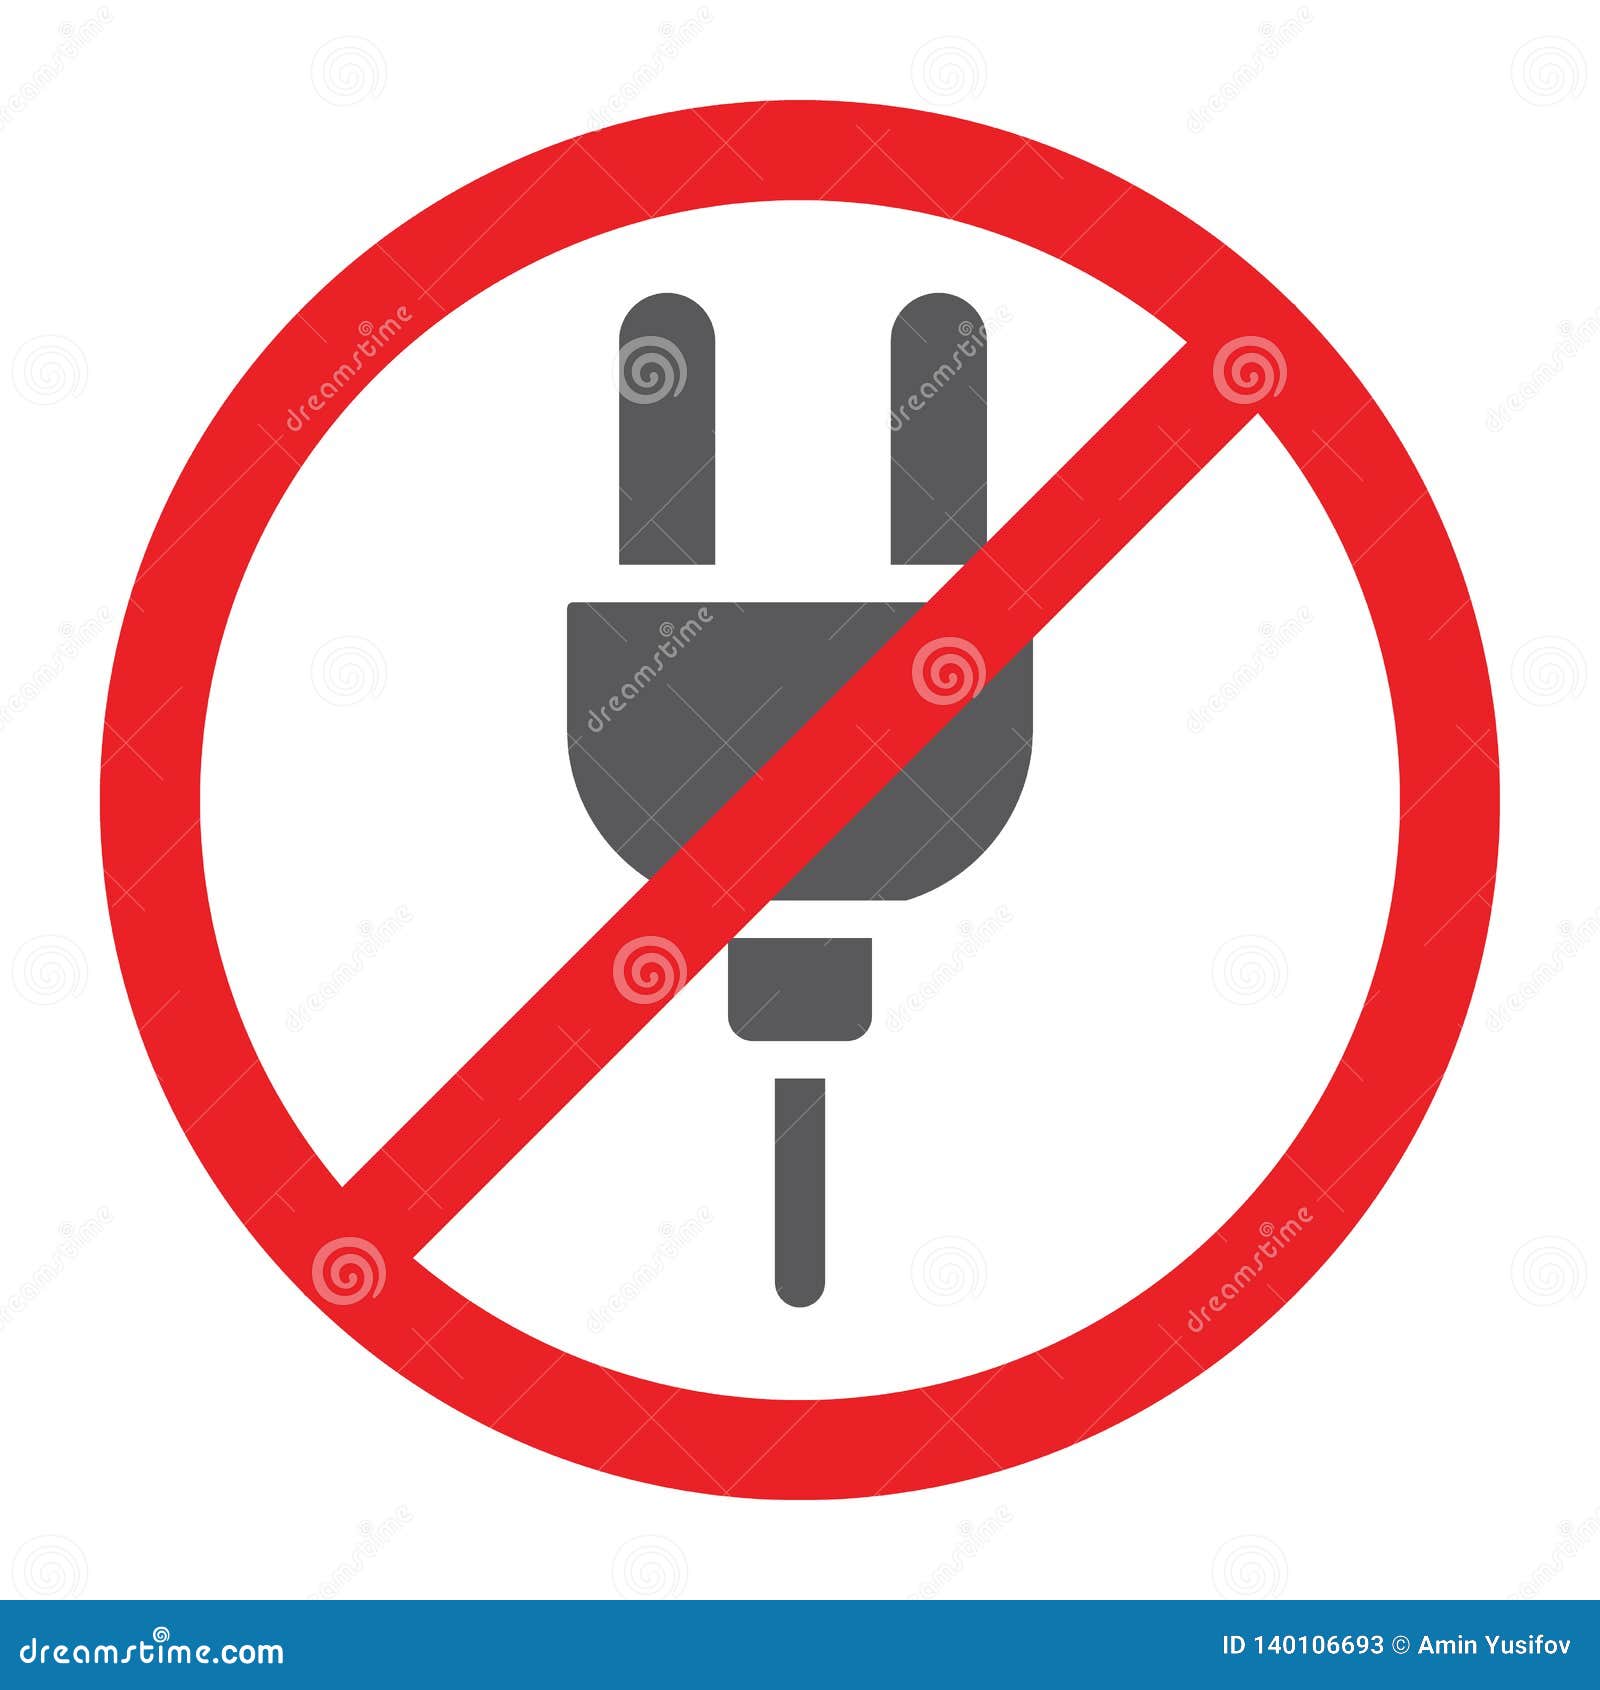 No Plug Glyph Icon, Prohibited And Forbidden, Do Not Connect Sign